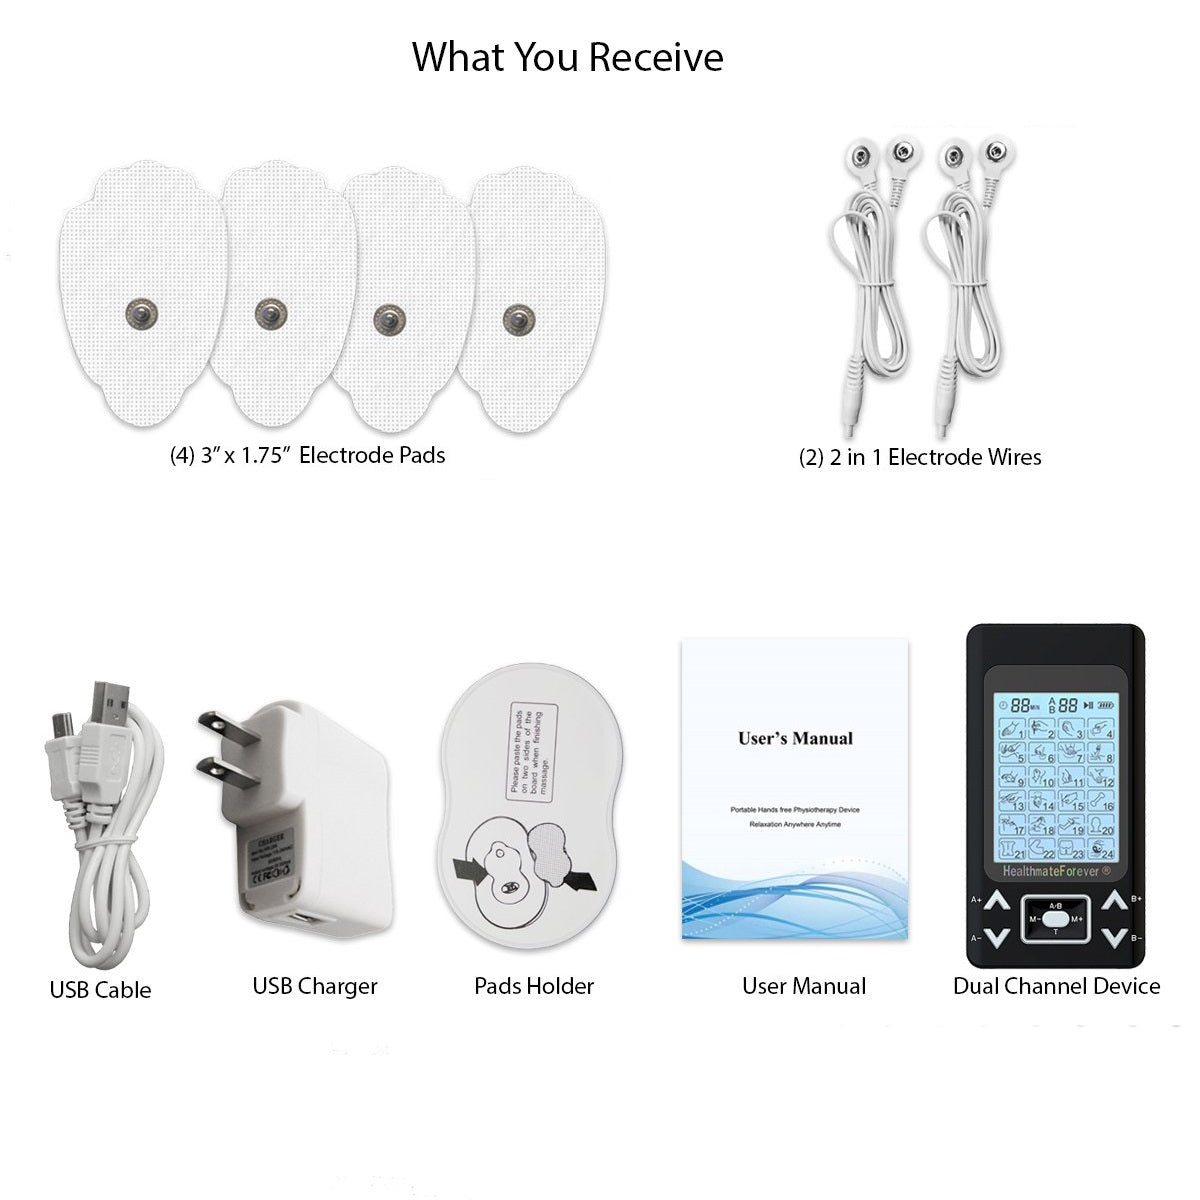 TENS Units - An Overview — Radiant Health Chiropractic